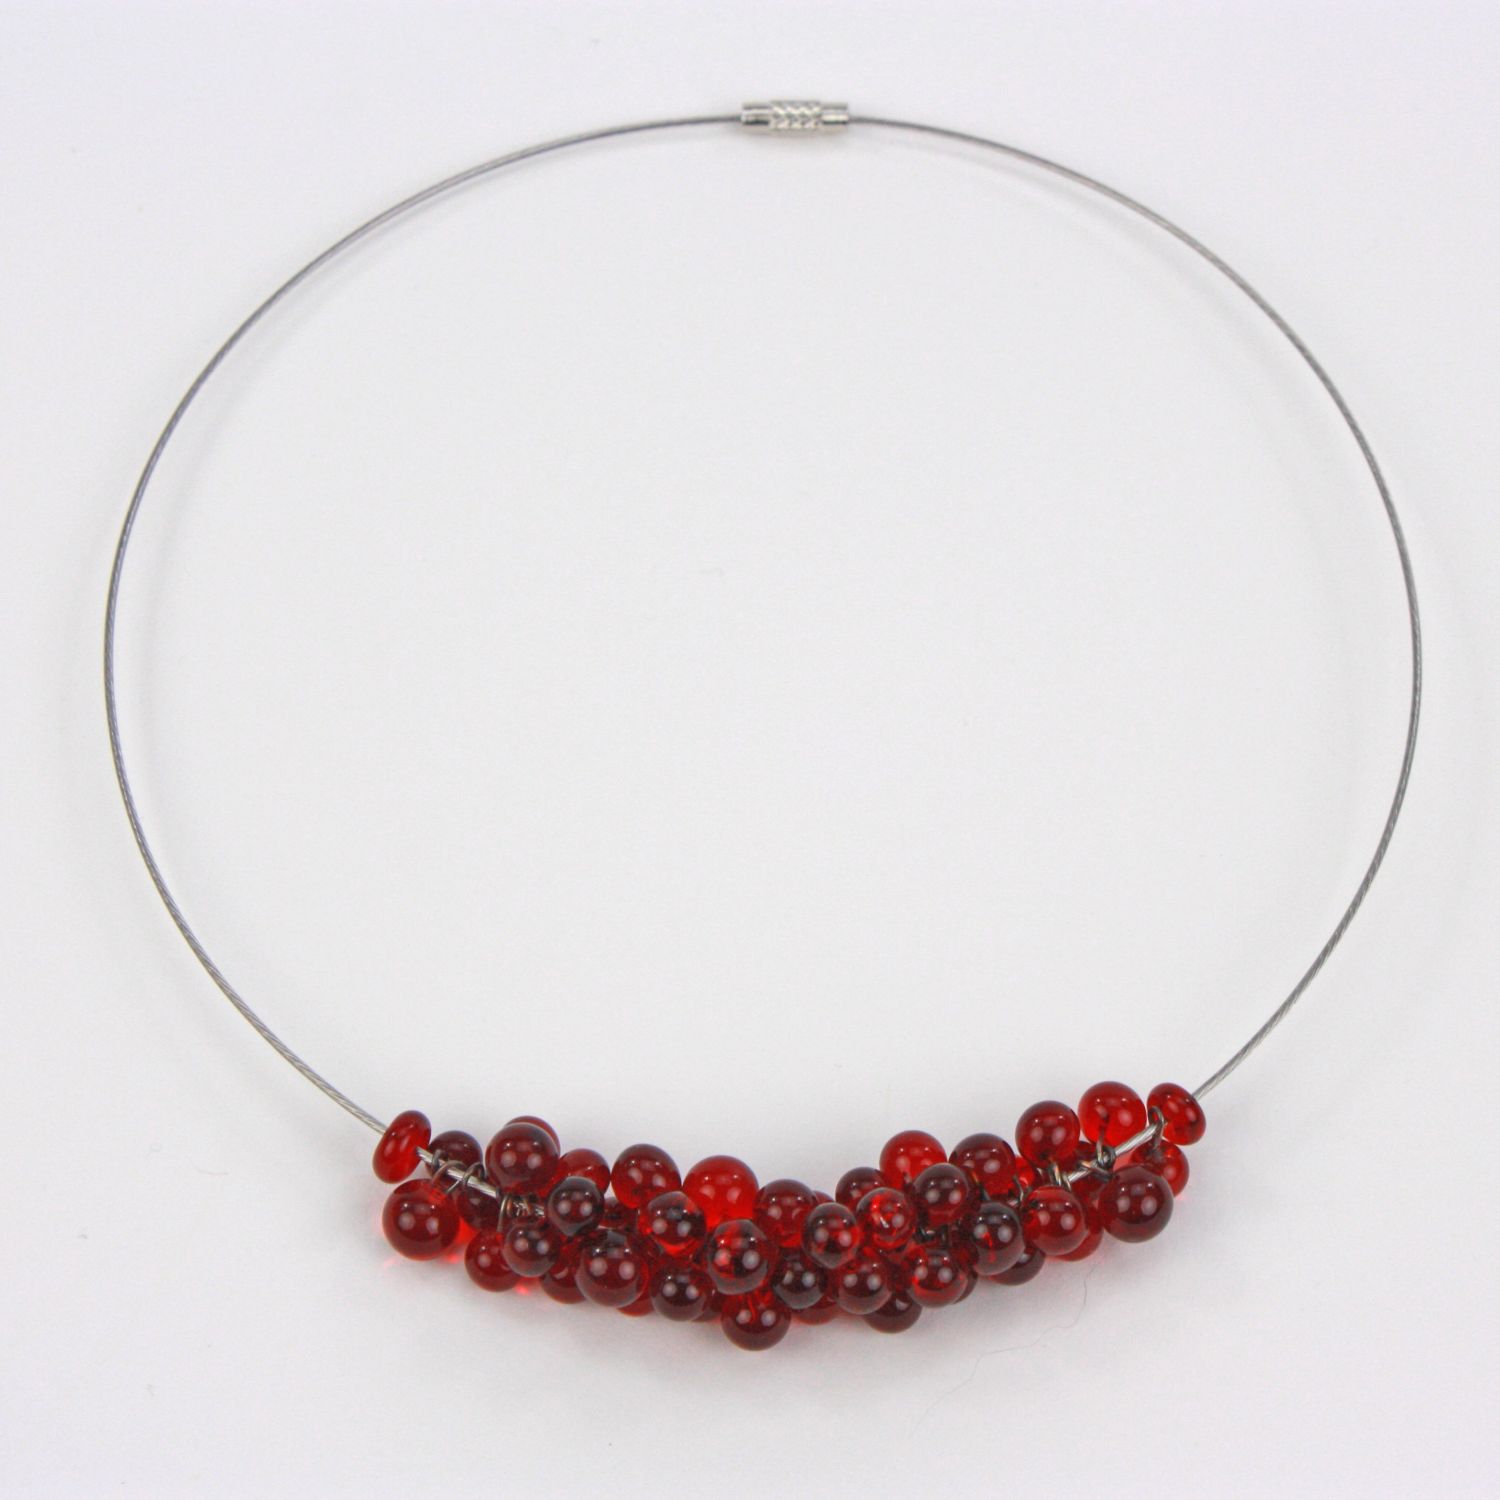 Alicia Niles: Petite Chroma Necklace – Red Product Image 1 of 3